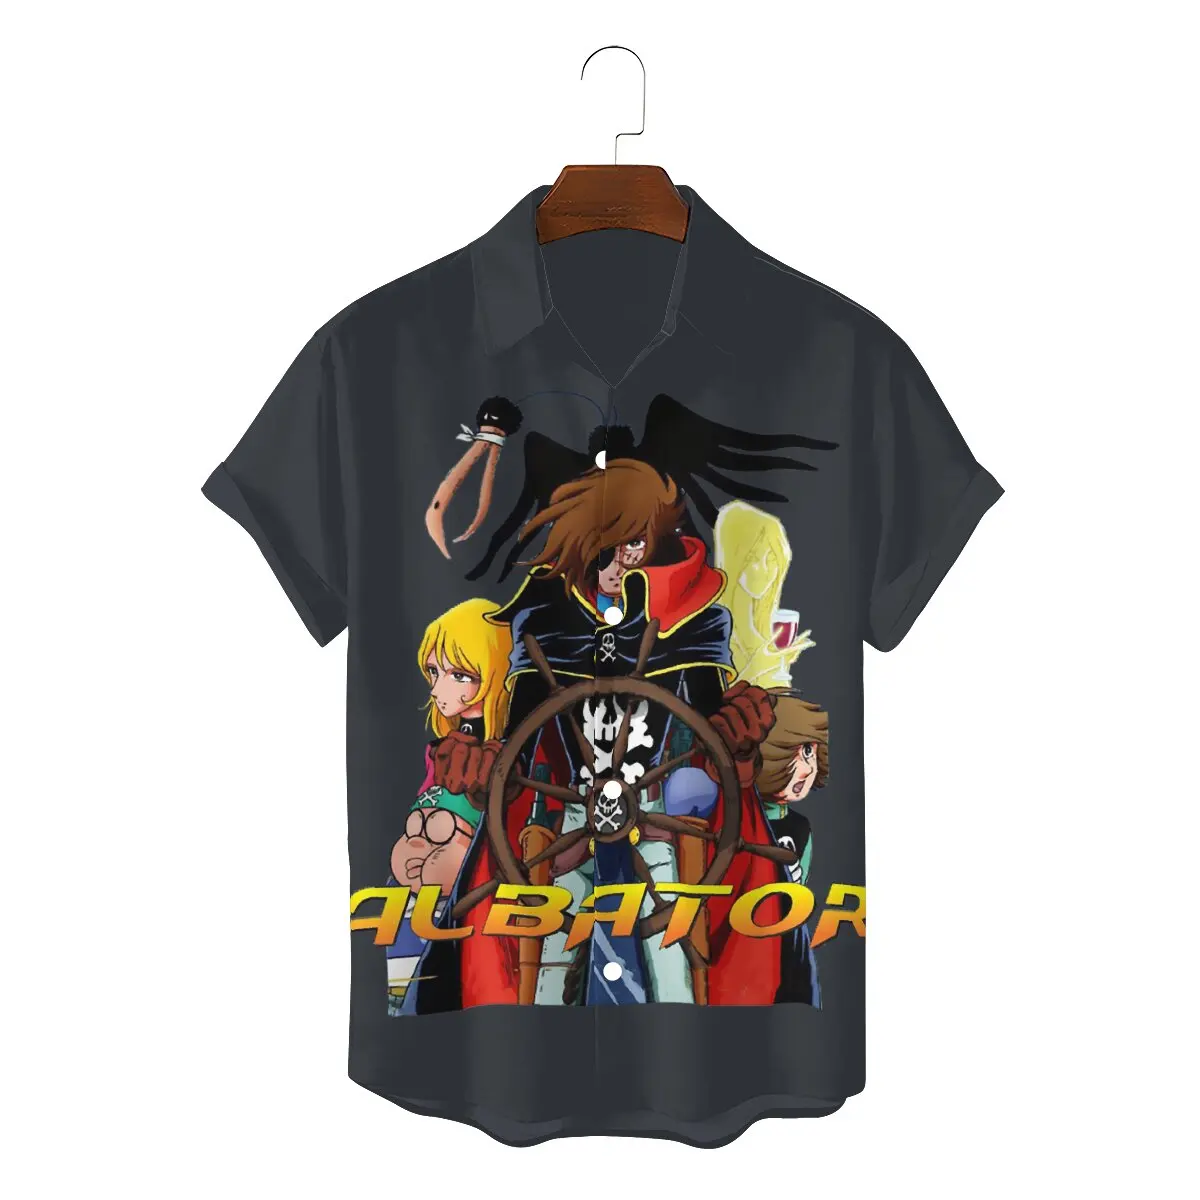 

Cpatain Harlock 3D Shirt Space Pirate Albator on Ship Classic Shirts Homme Men Clothes New Design Big Sale